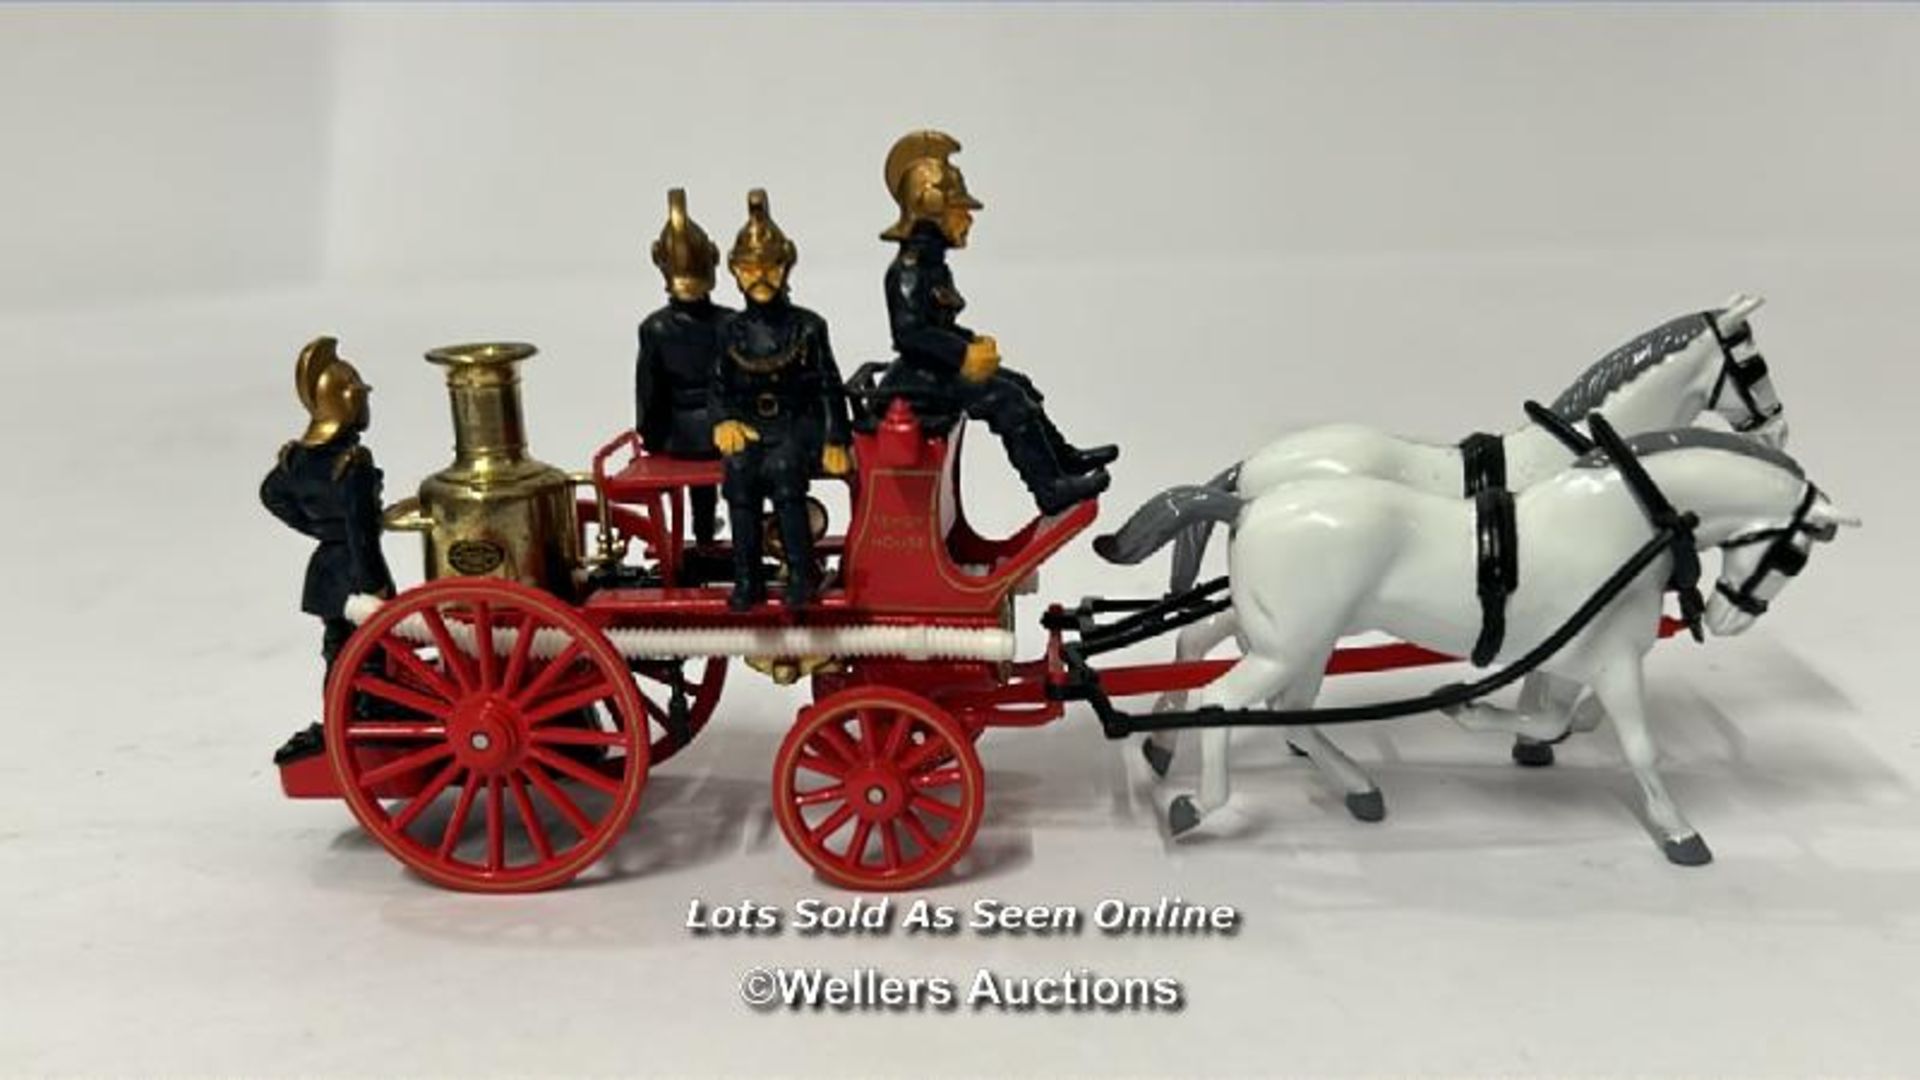 Two unboxed Matchbox models of Yesteryear models including 1905 Bush Fire Engine Y-43 and - Image 7 of 8